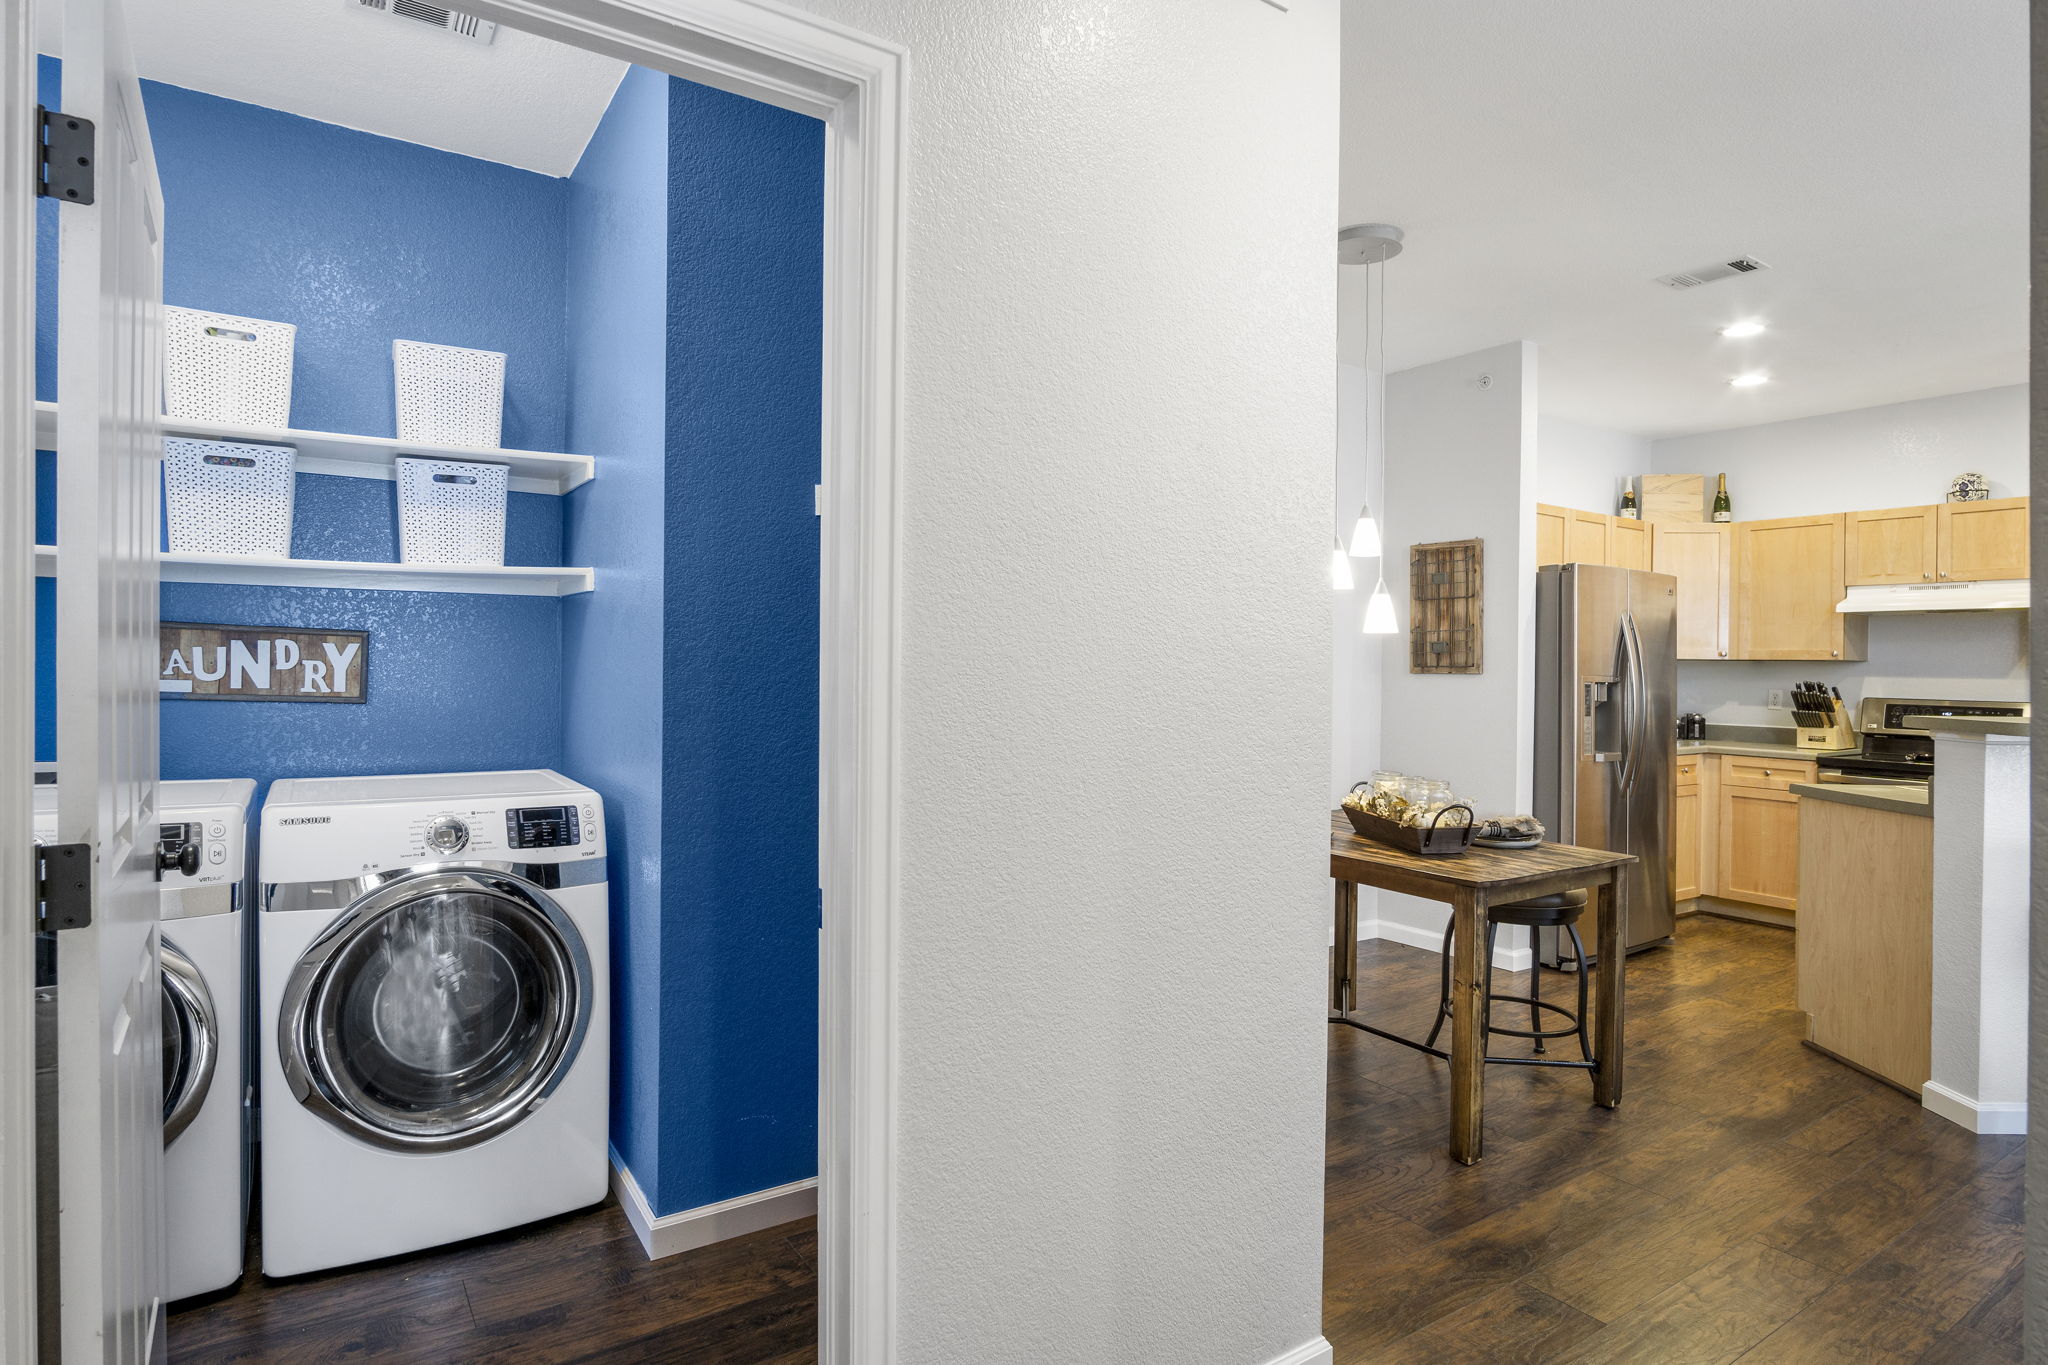 6 x 5 laundry room with washer and dryer included